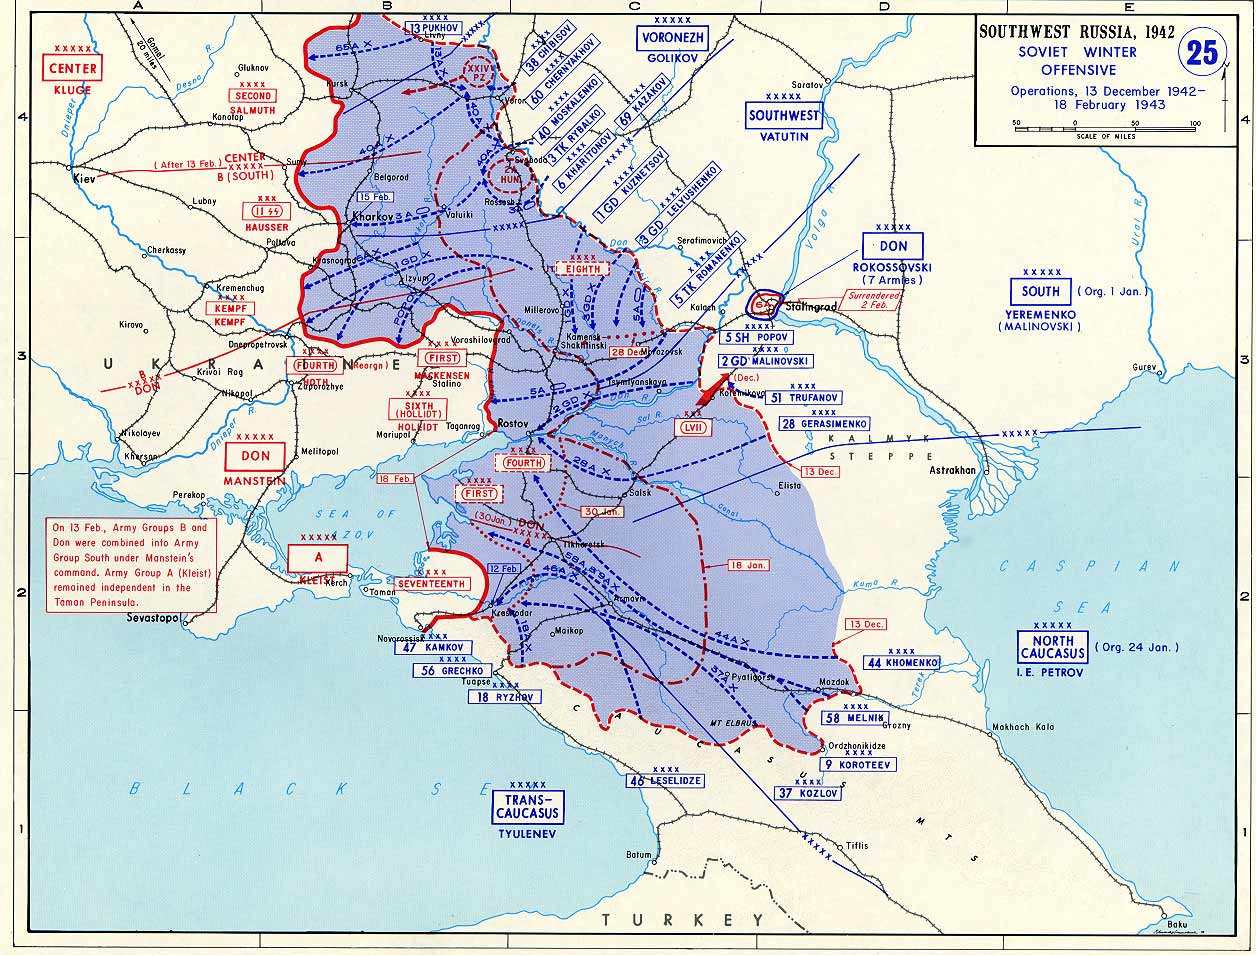 1706461843 453 THE DRIVE FOR THE CAUCASUS 1942 Part II